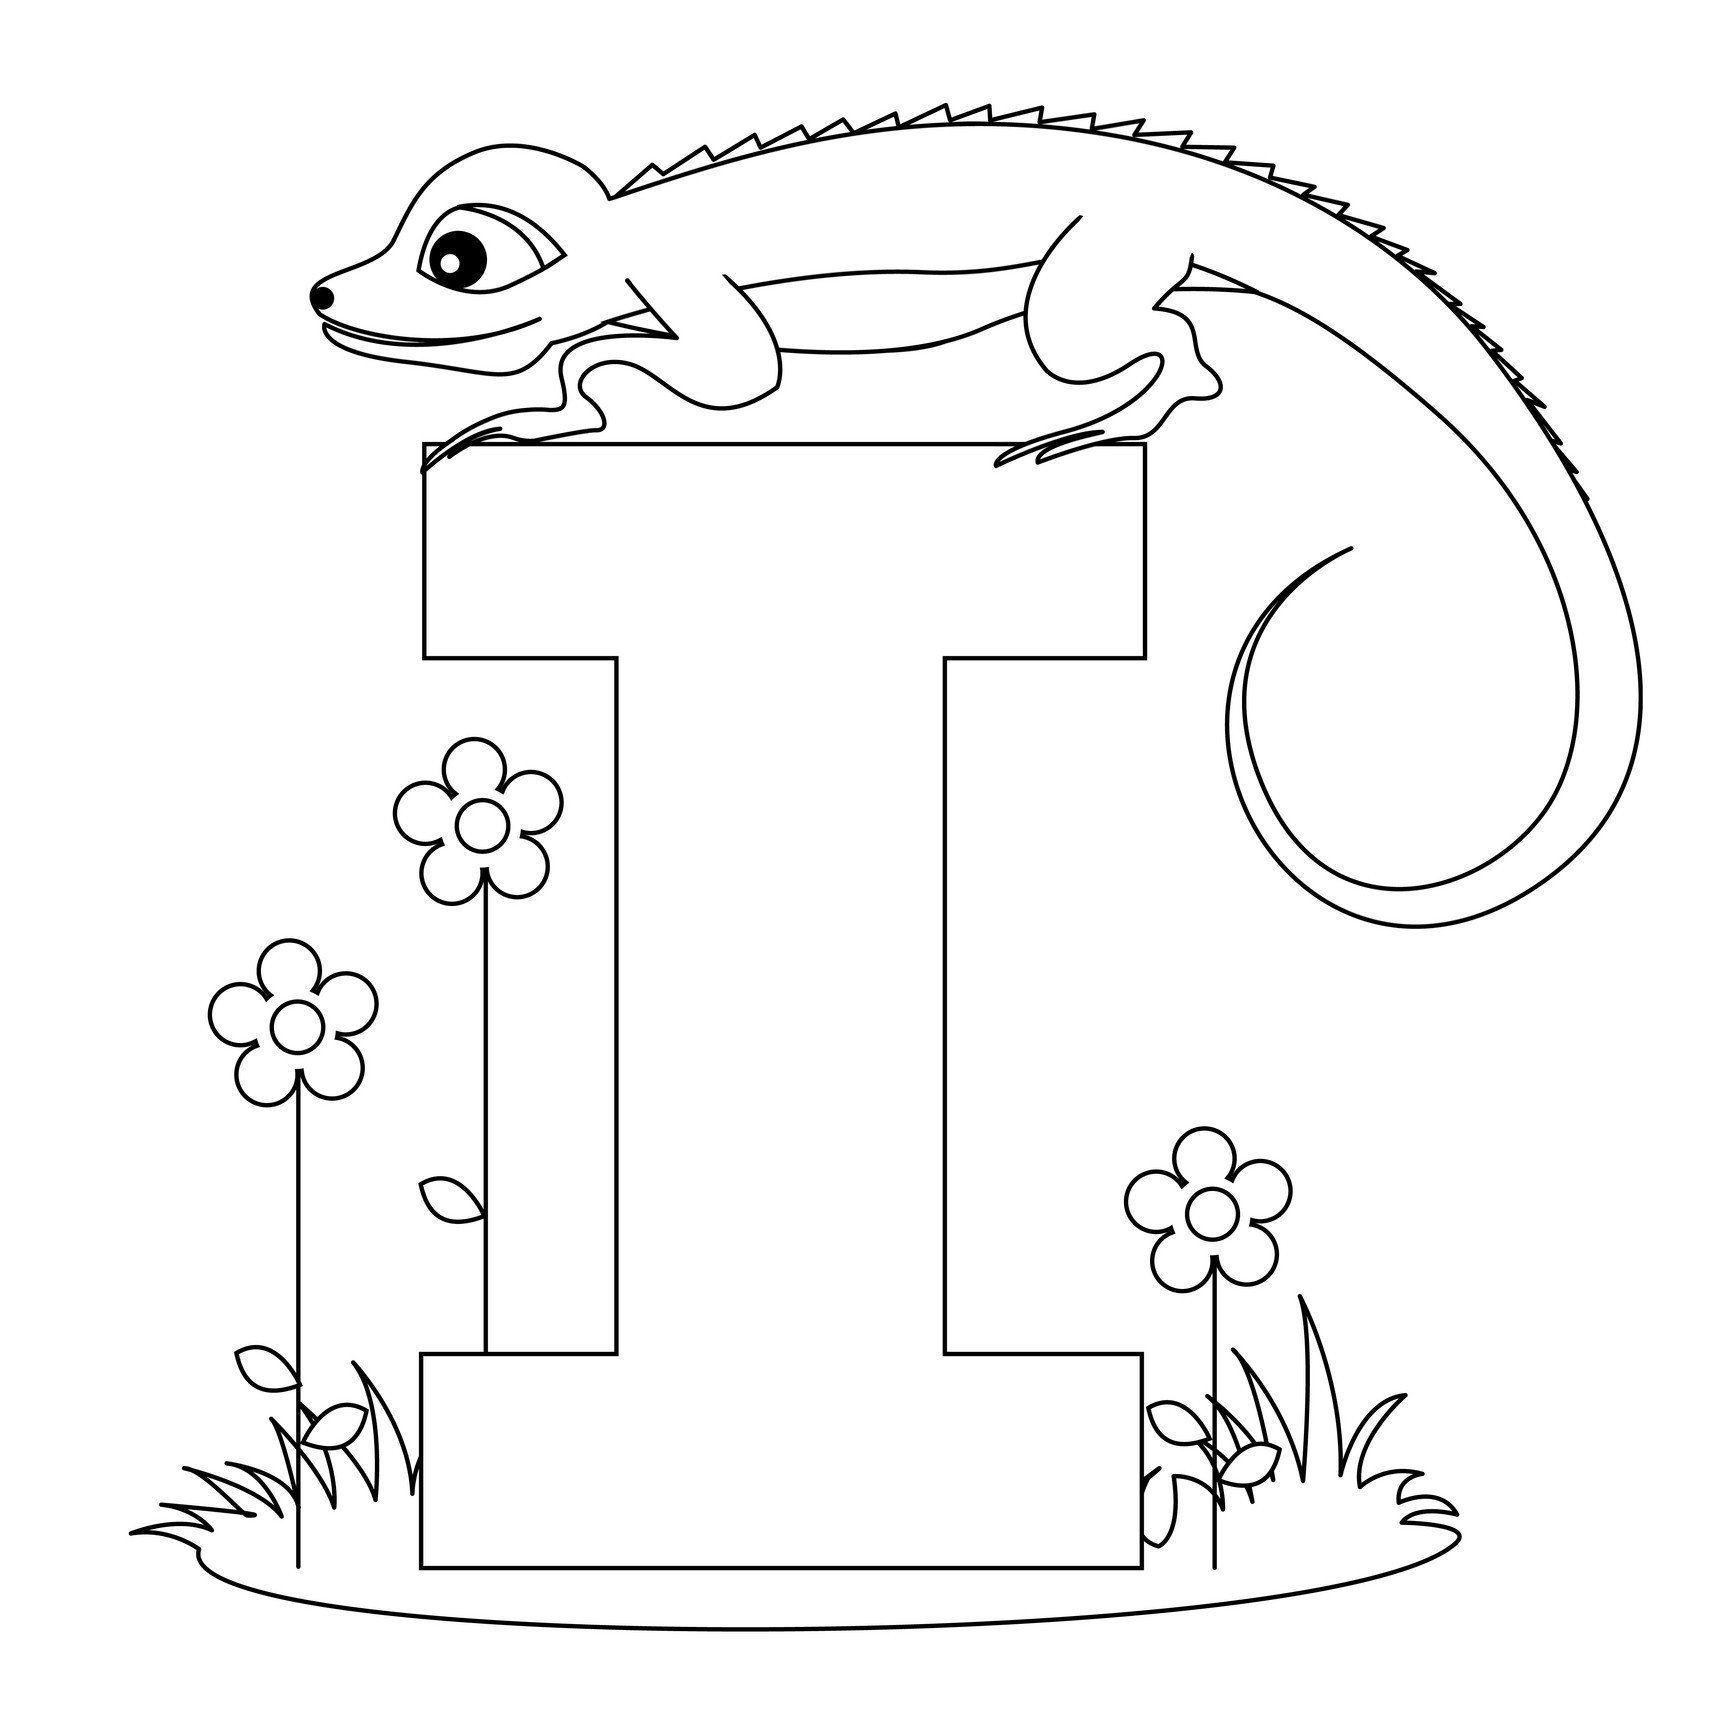 Alphebet Coloring Pages
 Free Printable Alphabet Coloring Pages for Kids Best